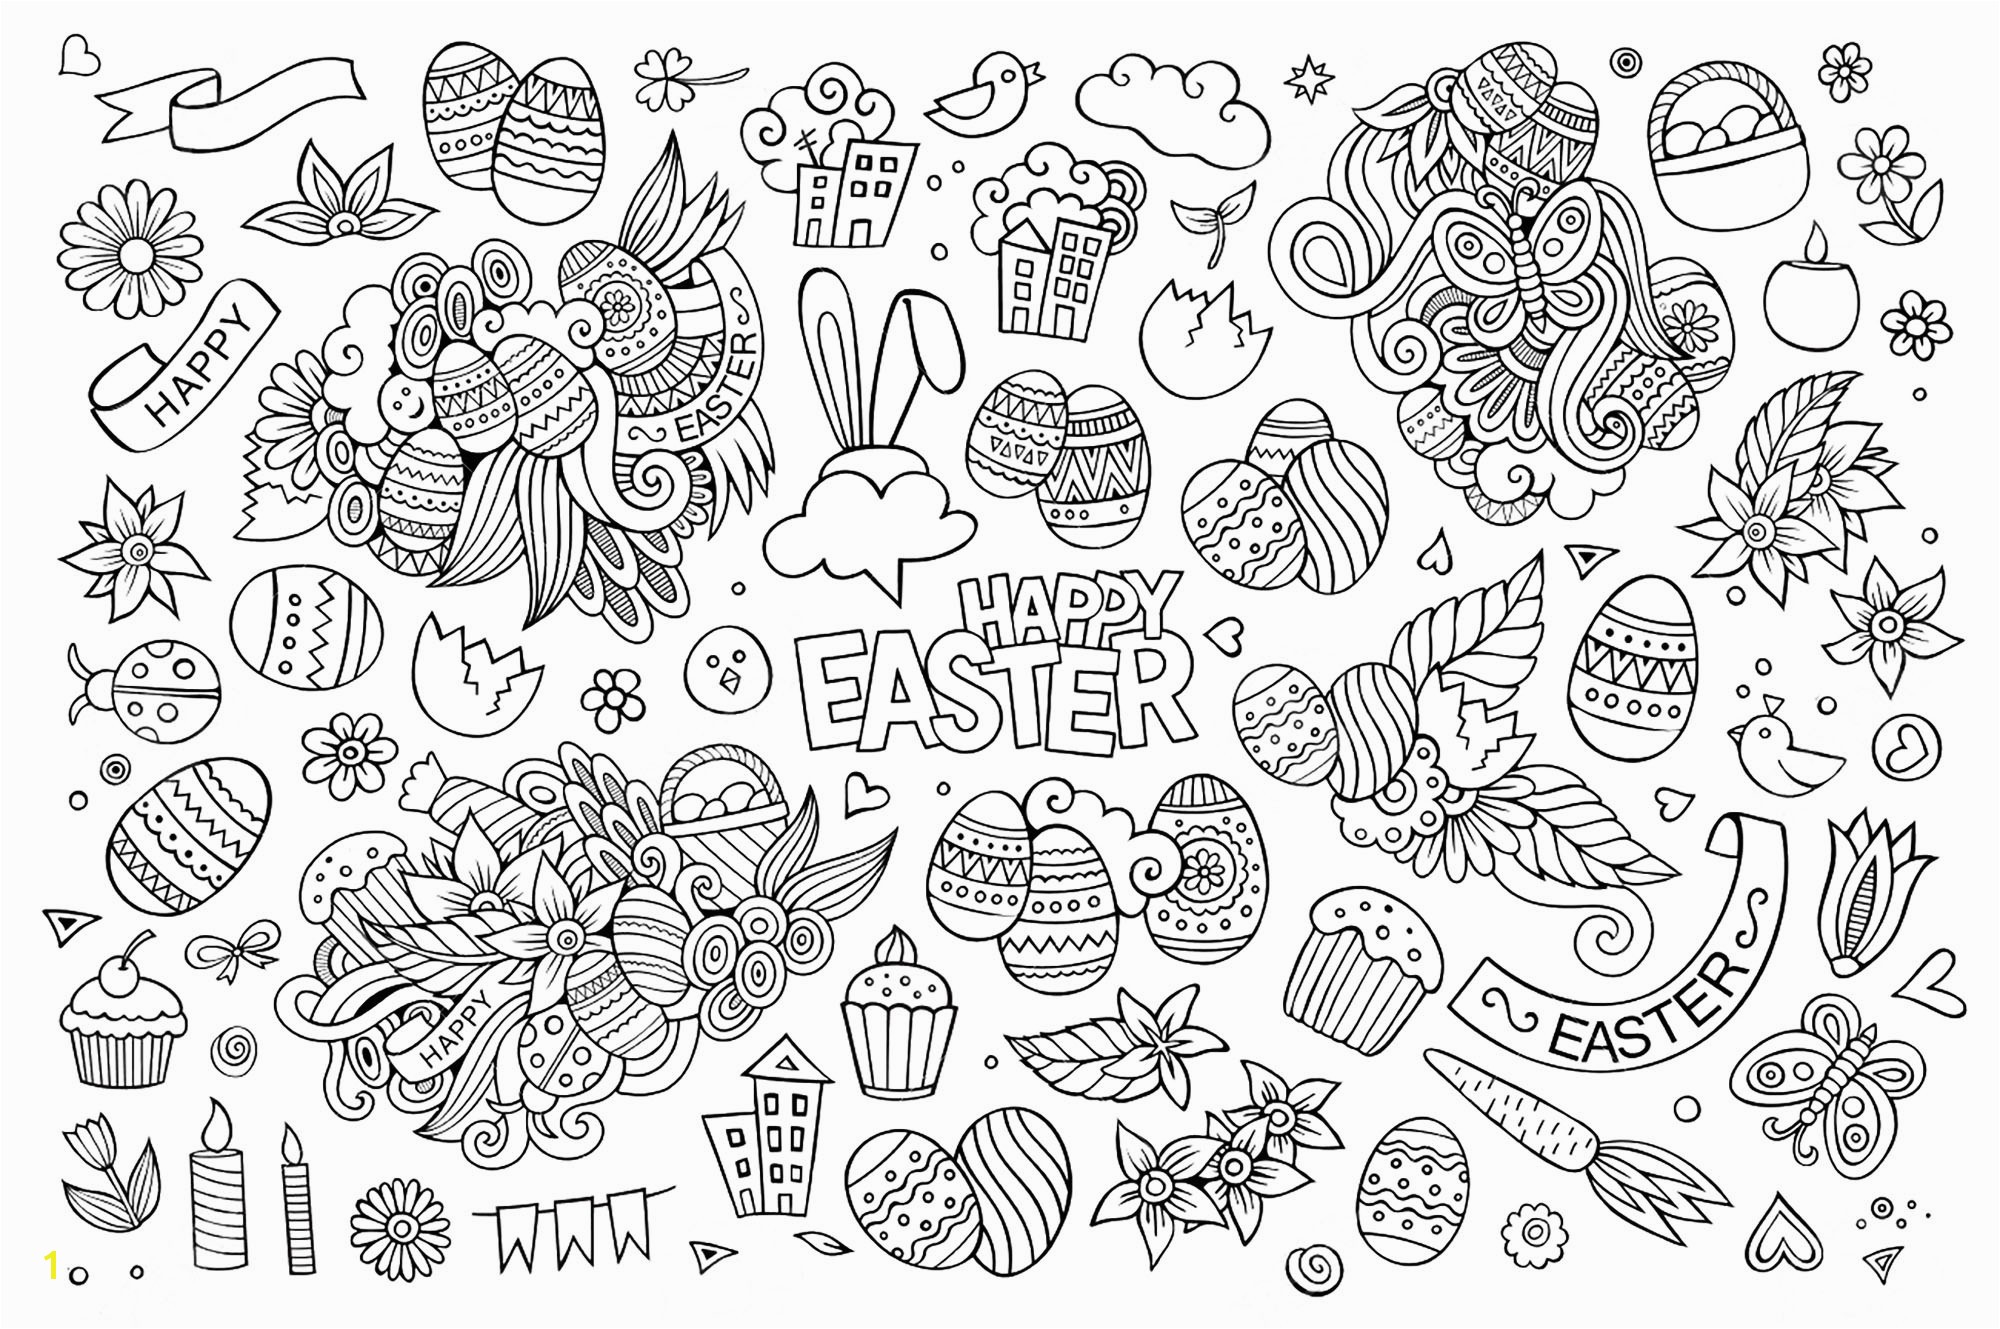 Egg Hunt Coloring Pages 11 New Egg Hunt Coloring Pages